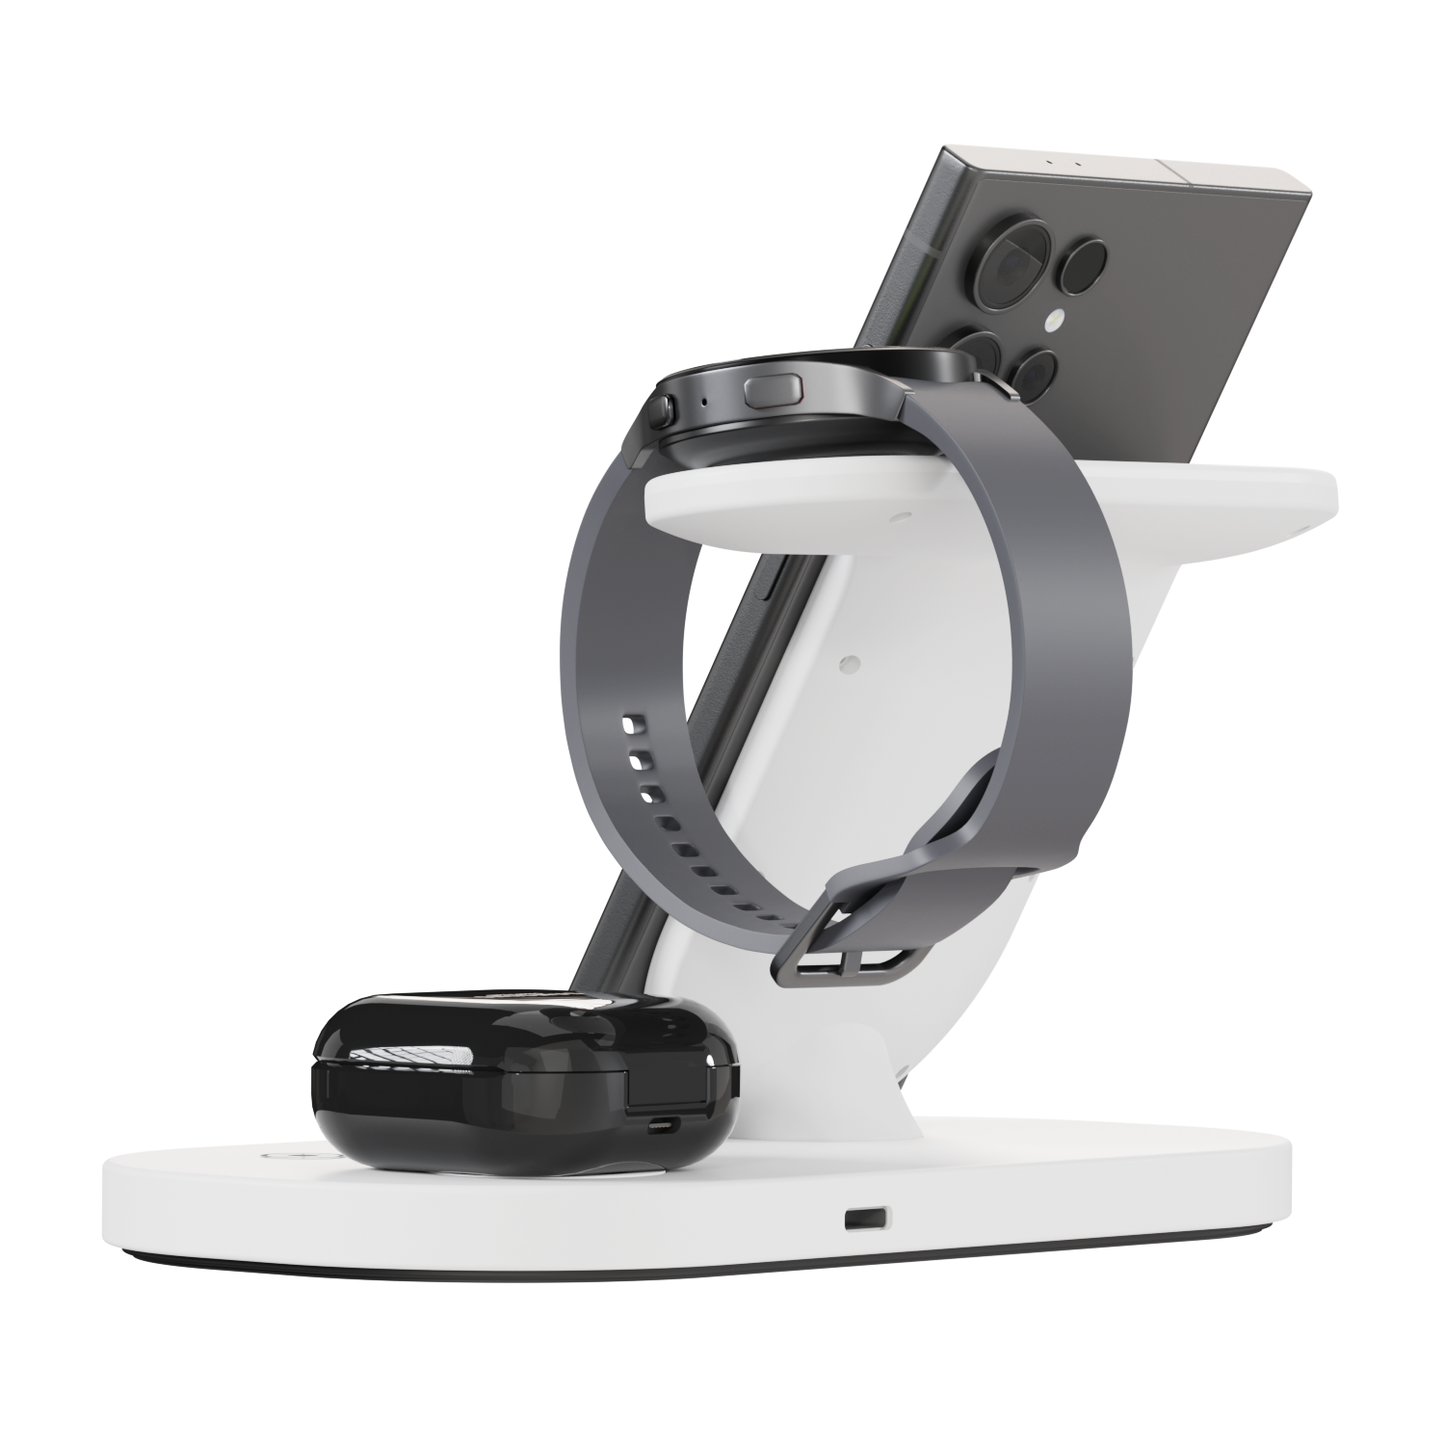 iCharger Pro Edition White sleek white 3-in-1 wireless charging station powering a Samsung Galaxy smartphone, smartwatch, and earbuds with an intuitive charging interface on display.